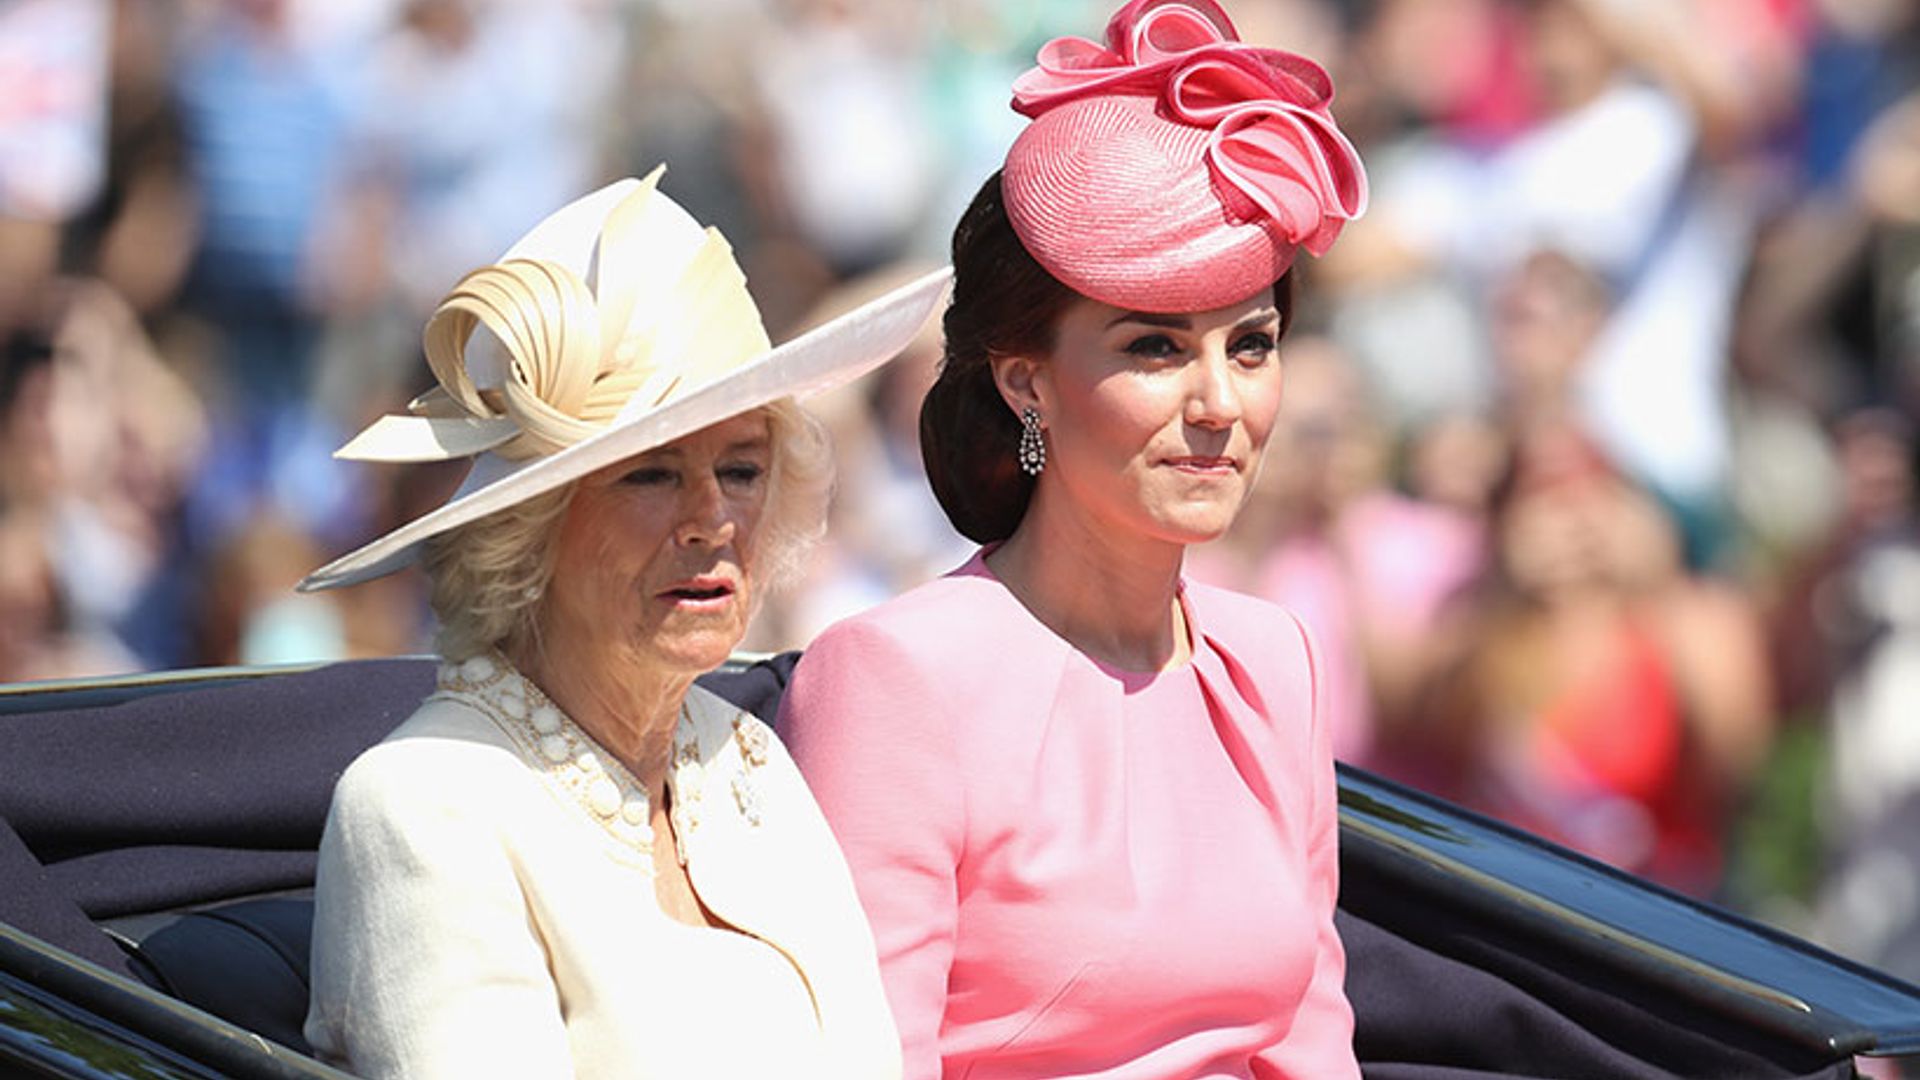 The Duchess of Cambridge looks pretty in pink at Trooping the Colour